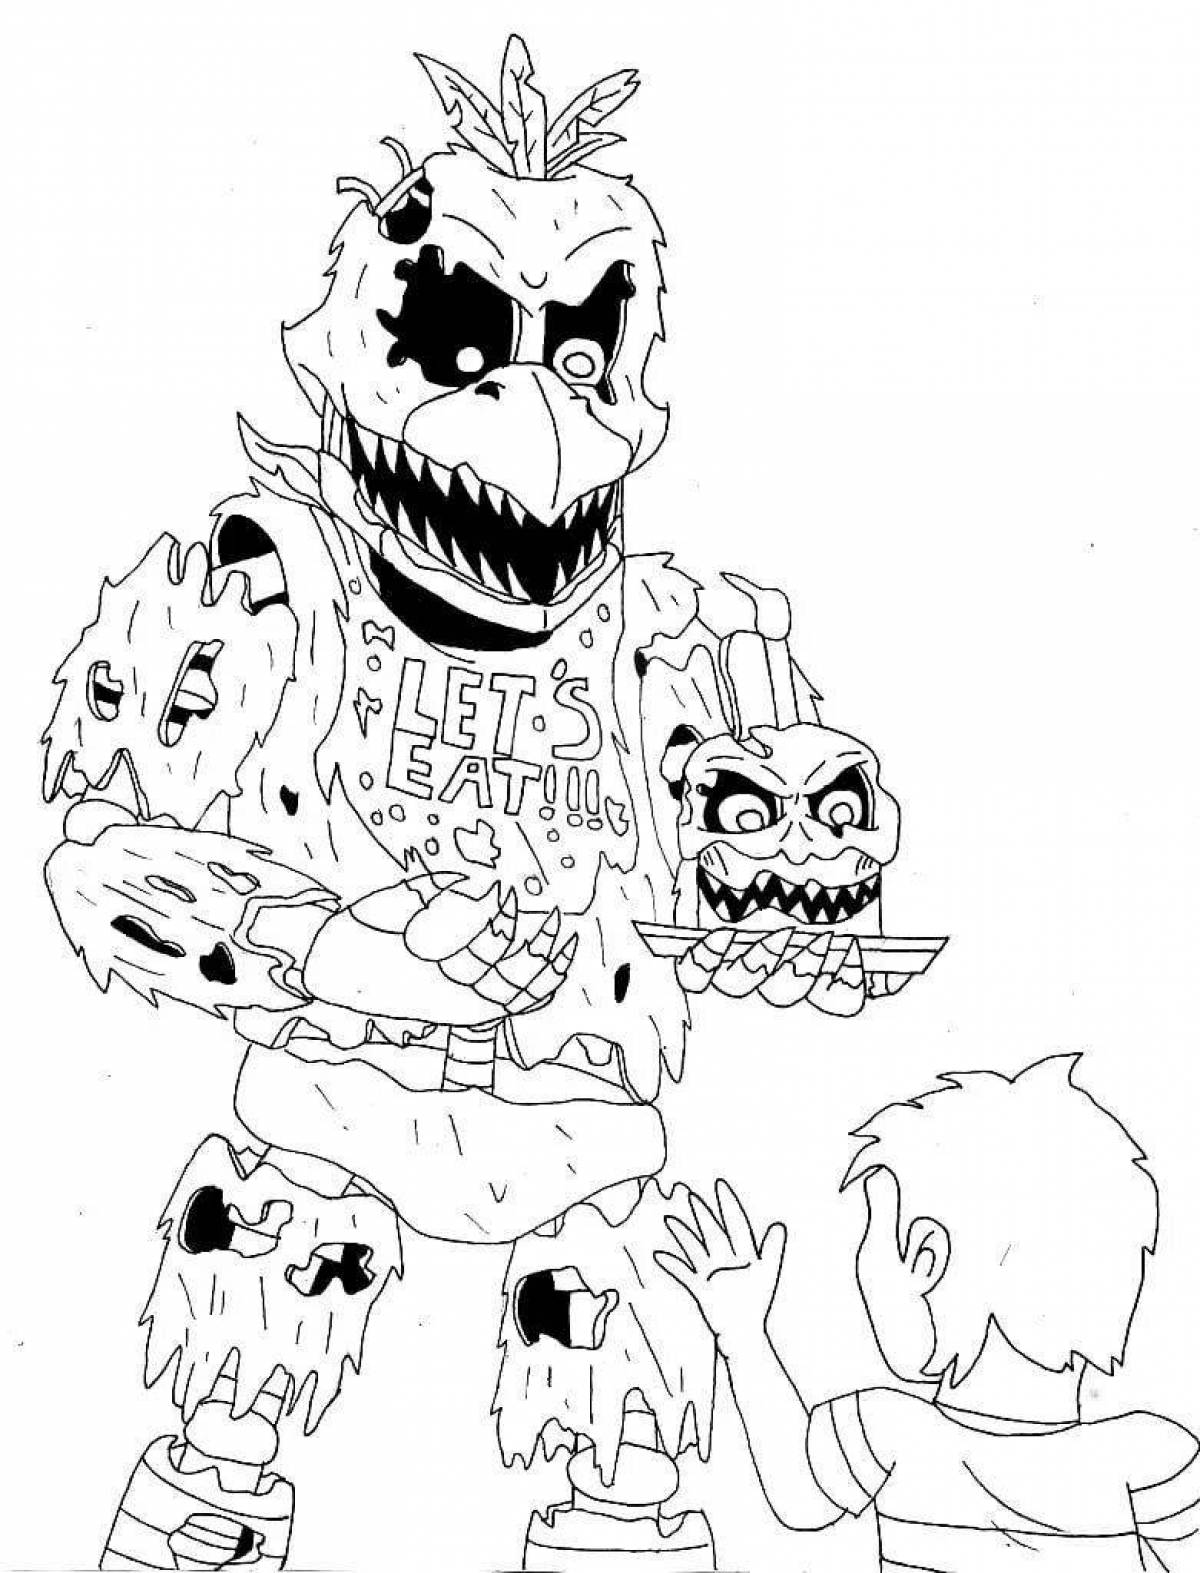 Animatronics Chilling Nightmare Coloring Page